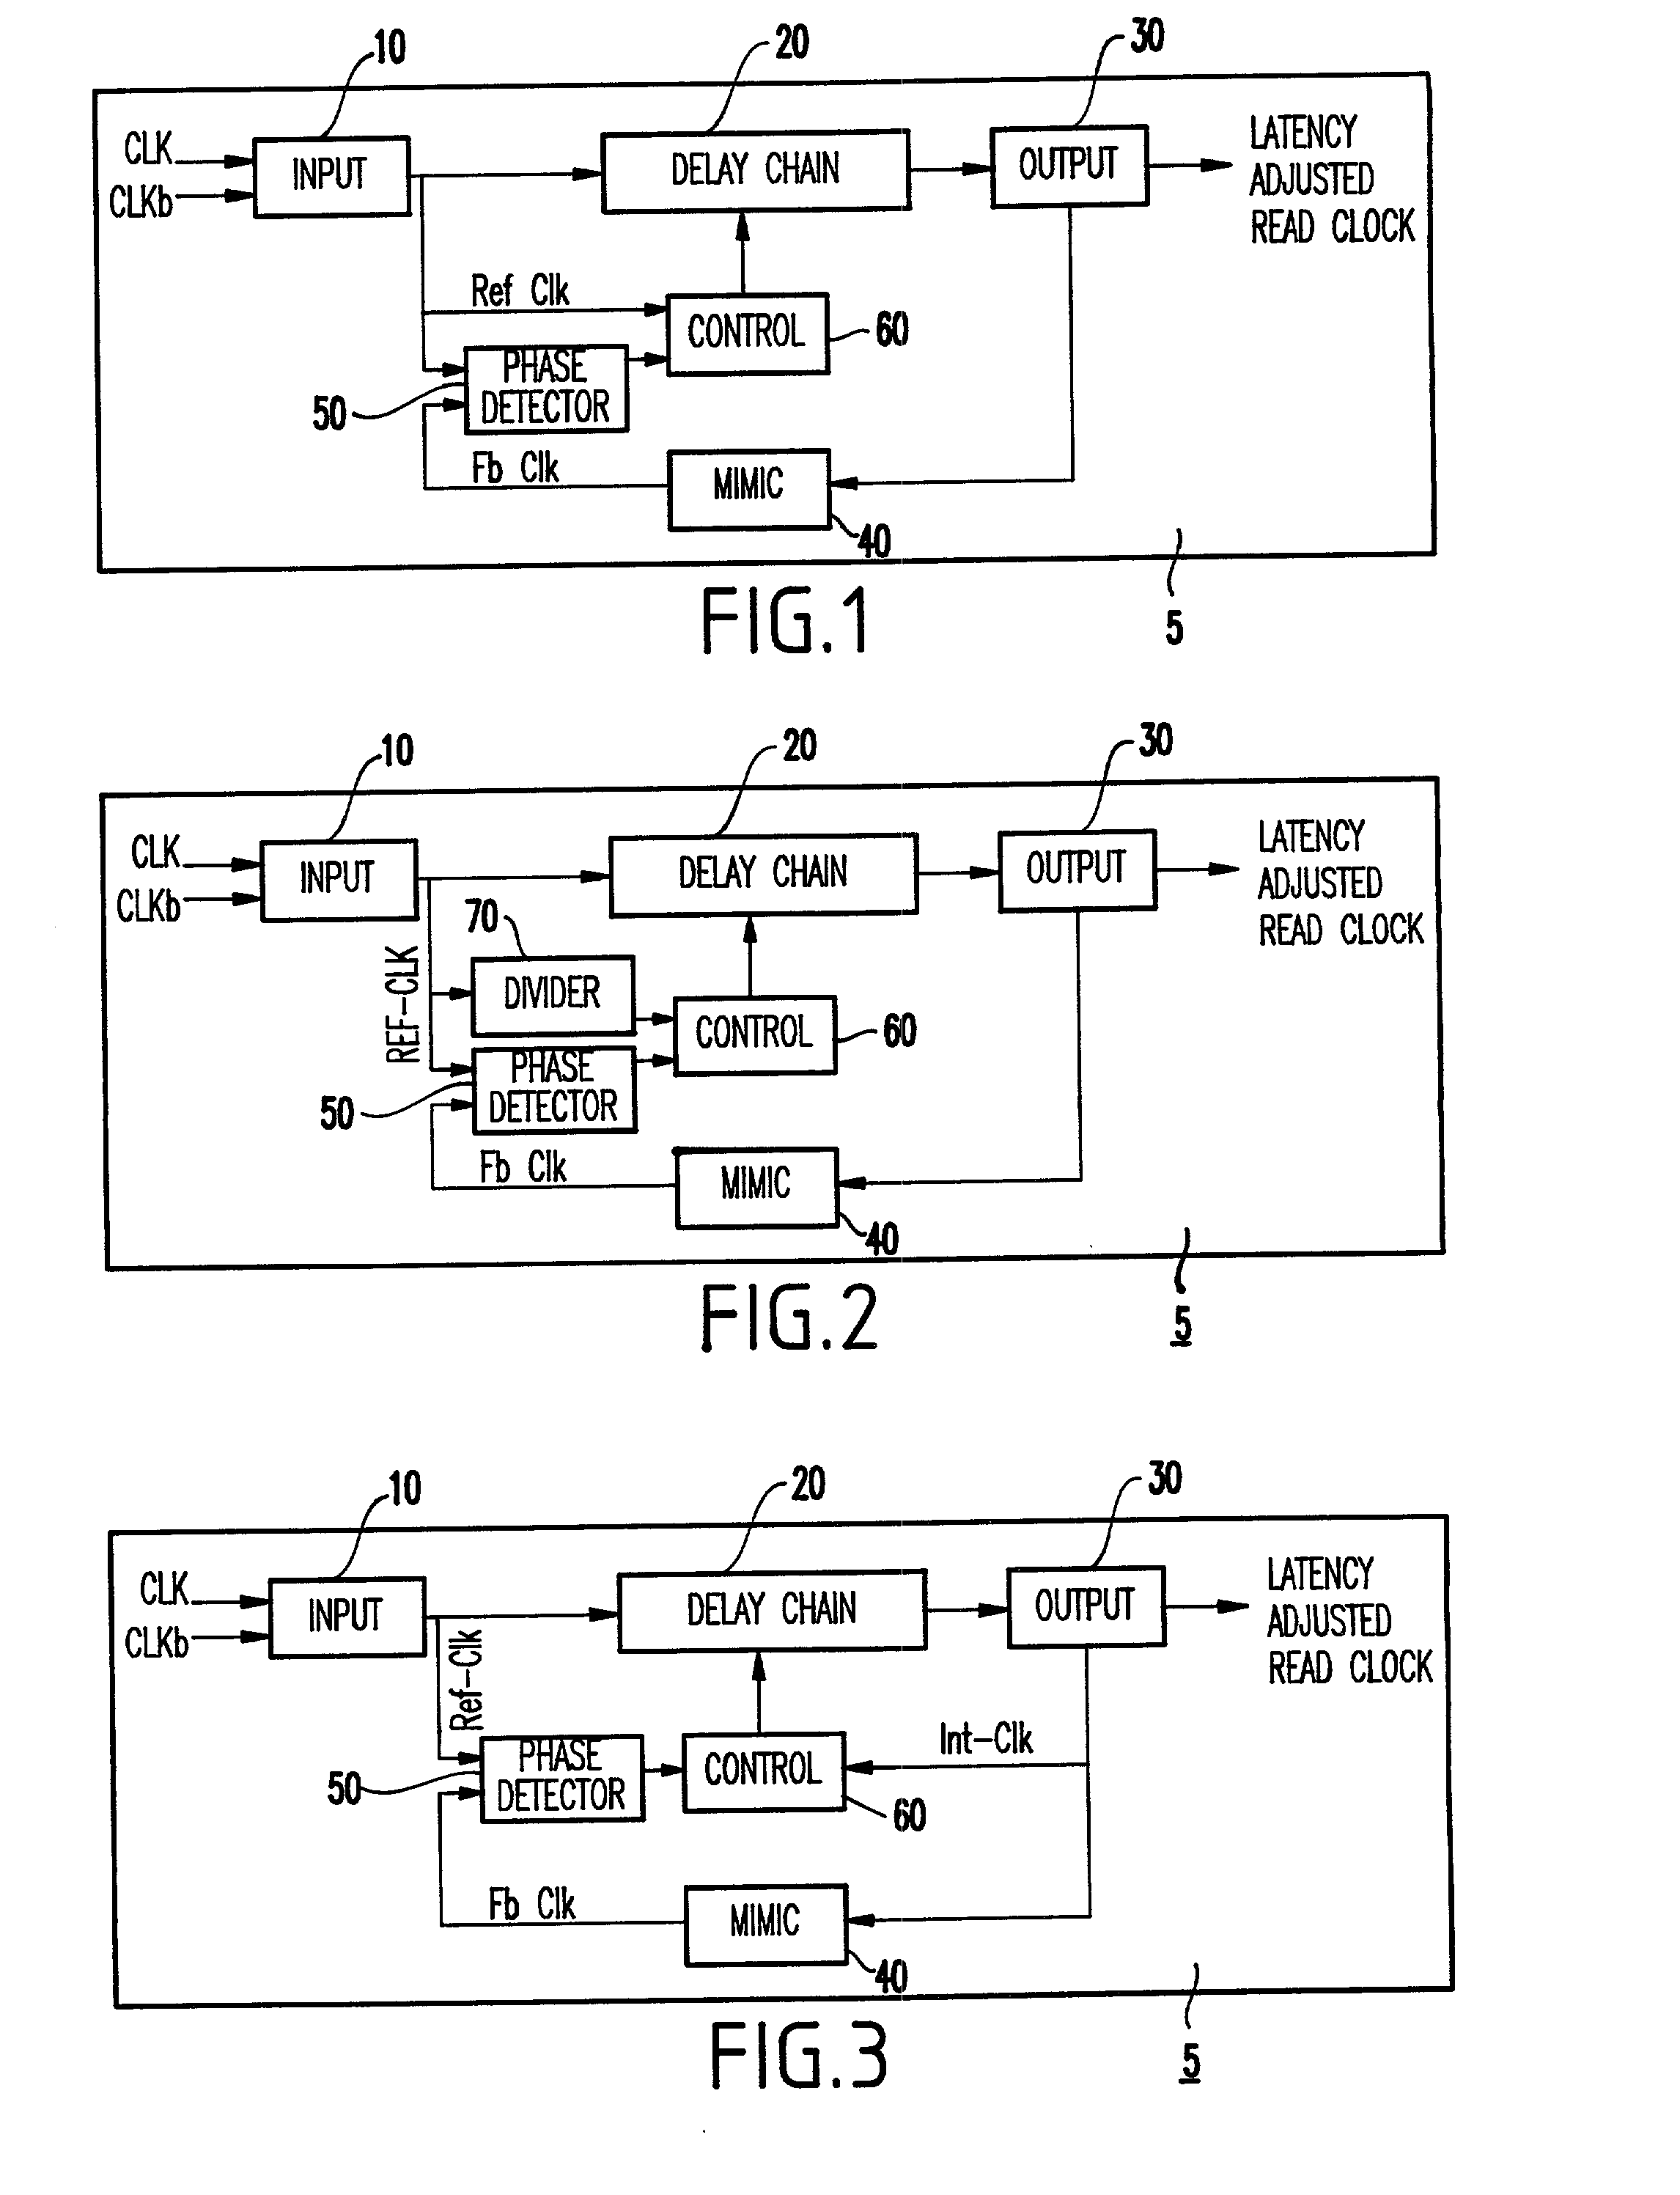 Pre-divider architecture for low power in a digital delay locked loop